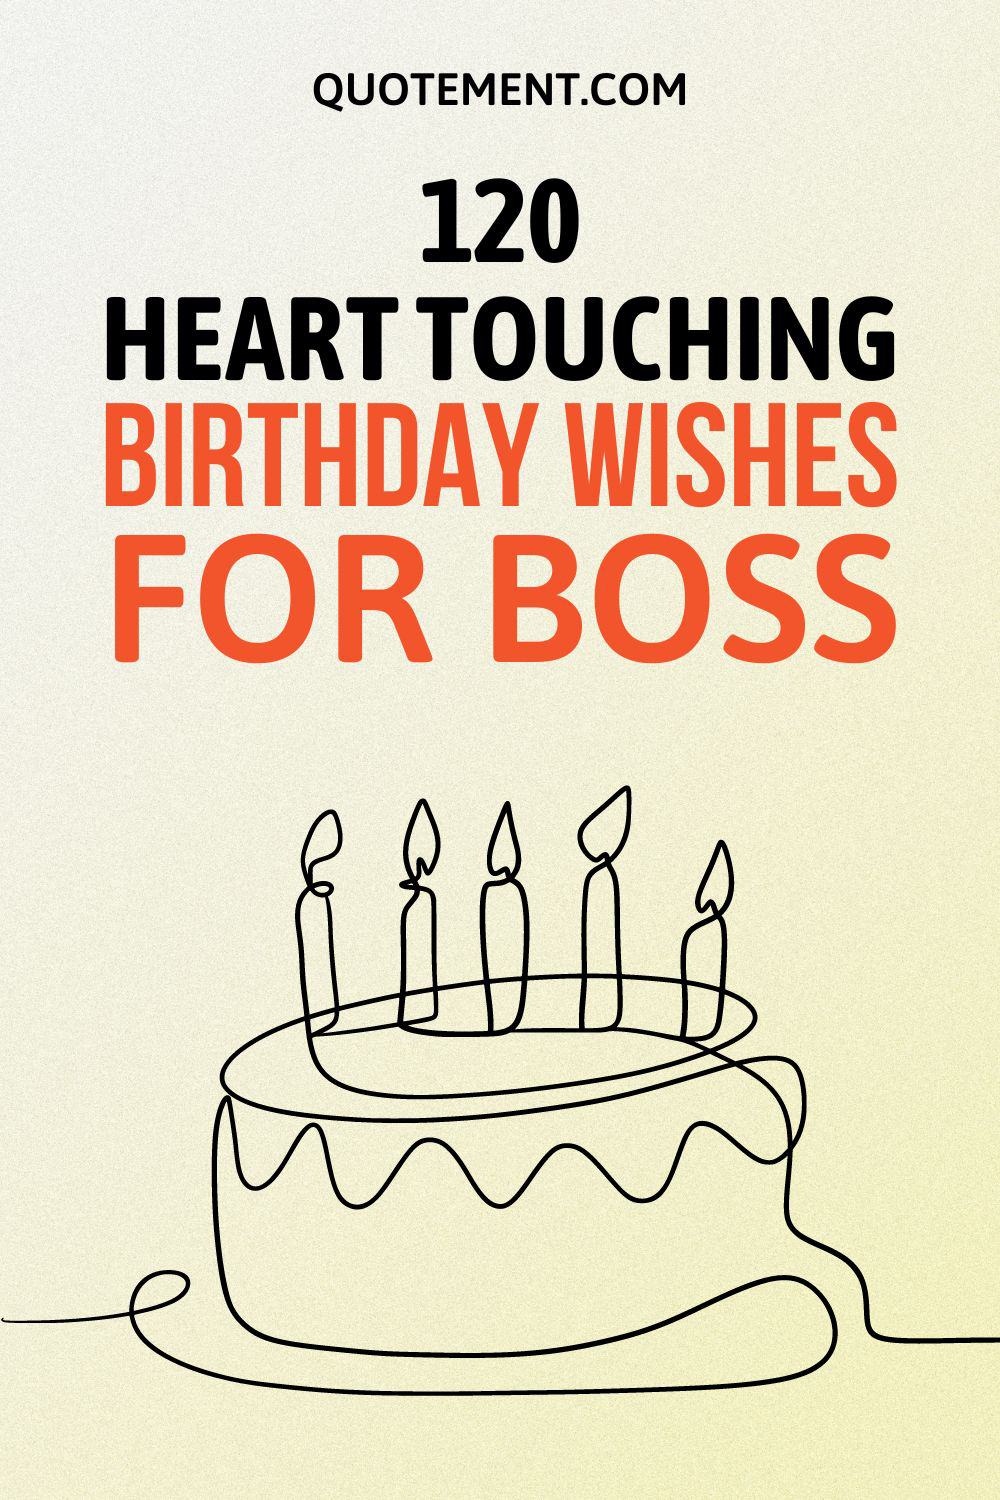 120 Creative & Heart Touching Birthday Wishes For Boss 